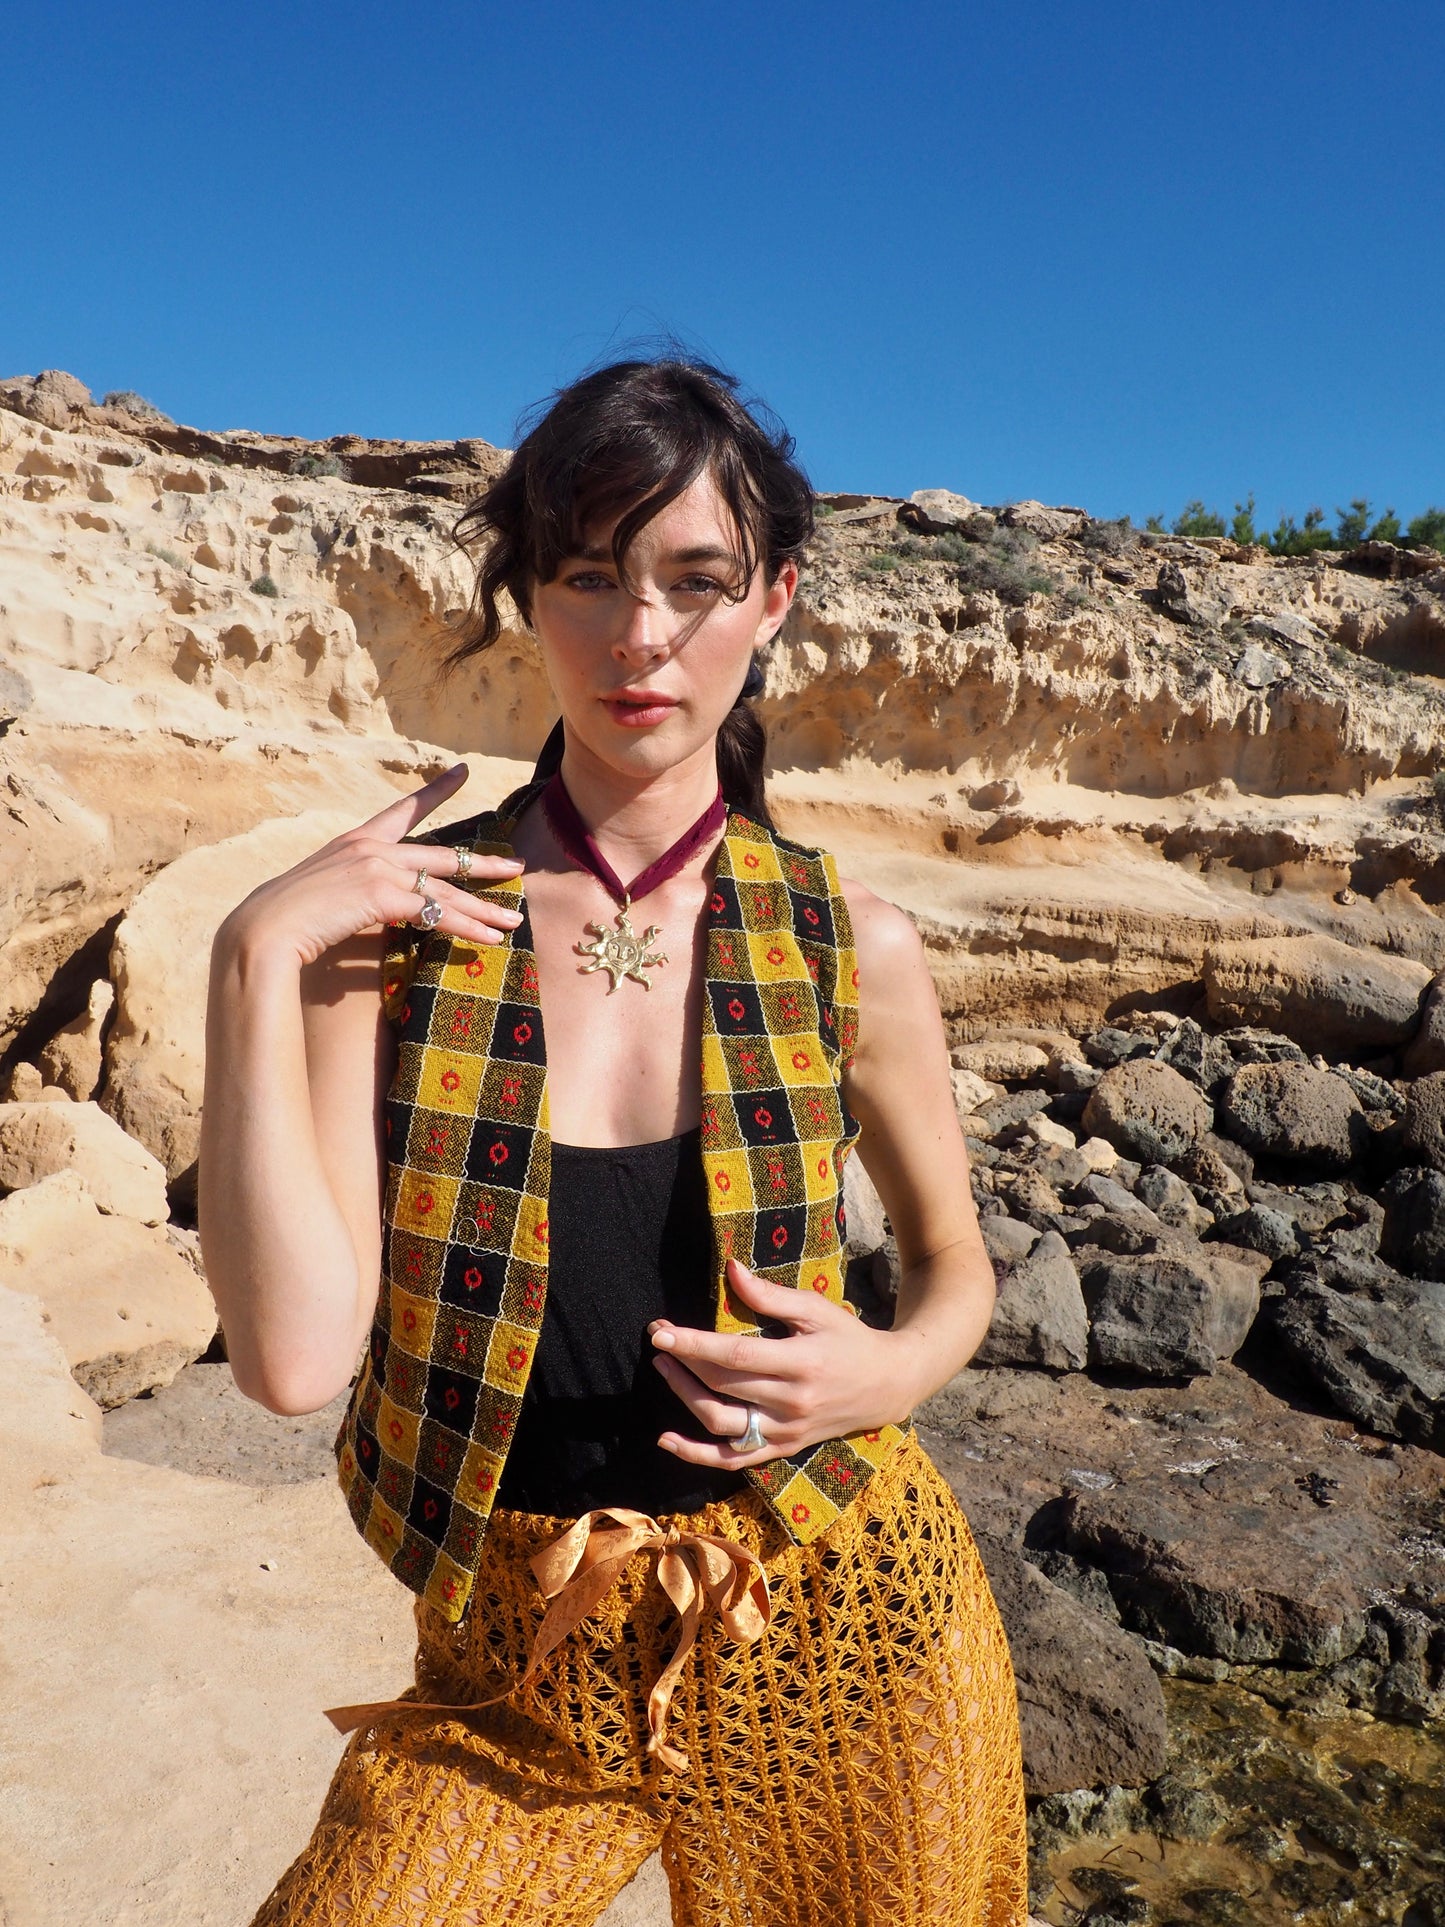 Small Cropped Waistcoat in Mustard Yellow, Black, and Red - Upcycled Vintage Textiles Made by Vagabond Ibiza